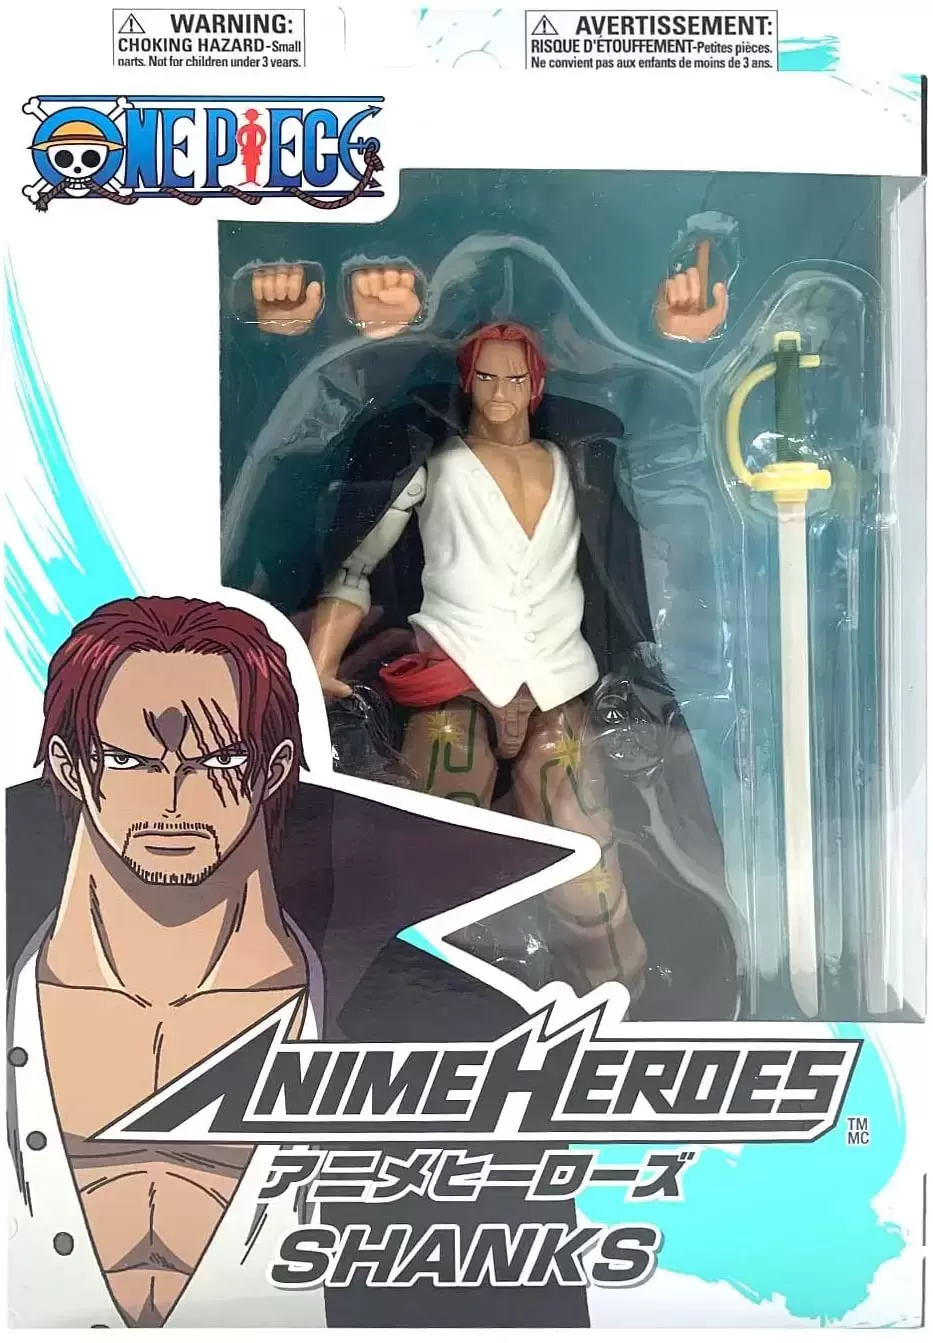 NEW One Piece Anime Heroes Wave 2 Shanks And Portgas D Ace  YouTube